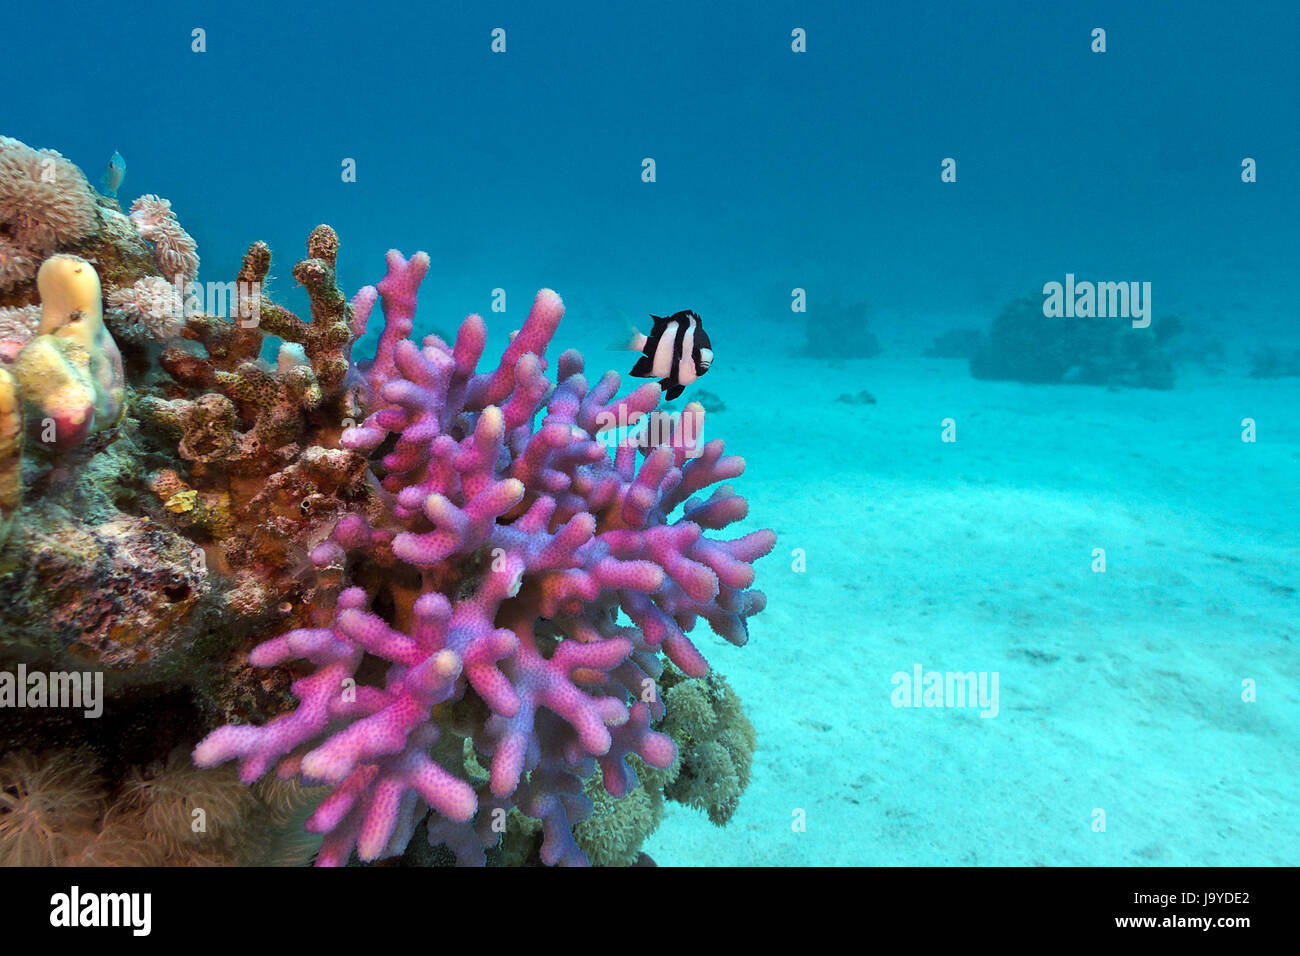 coral reef coral hood with violet end exotic fish at the bottom of tropical sea on blue water background Stock Photo